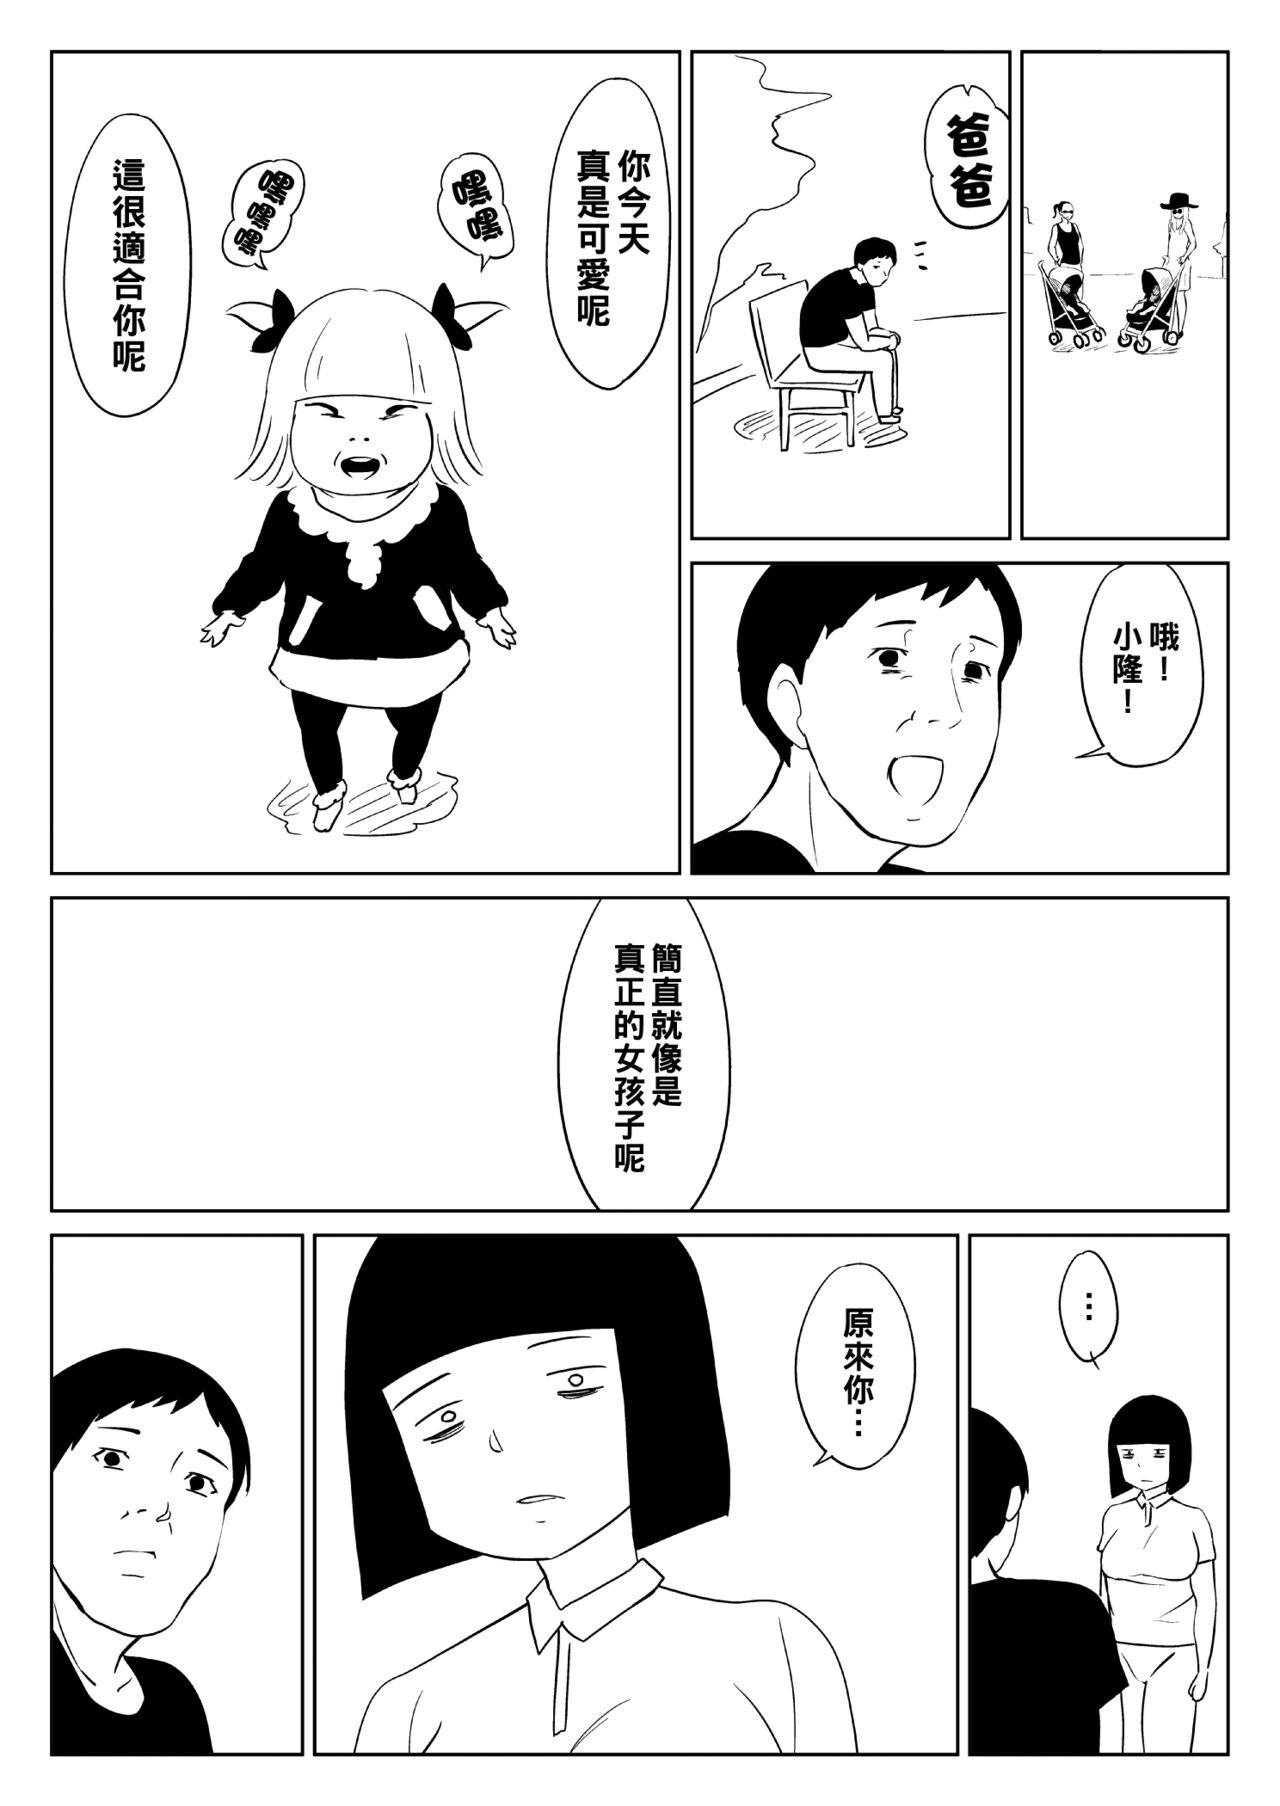 Arrecha アイムPオジ（Chinese） Workout - Page 23